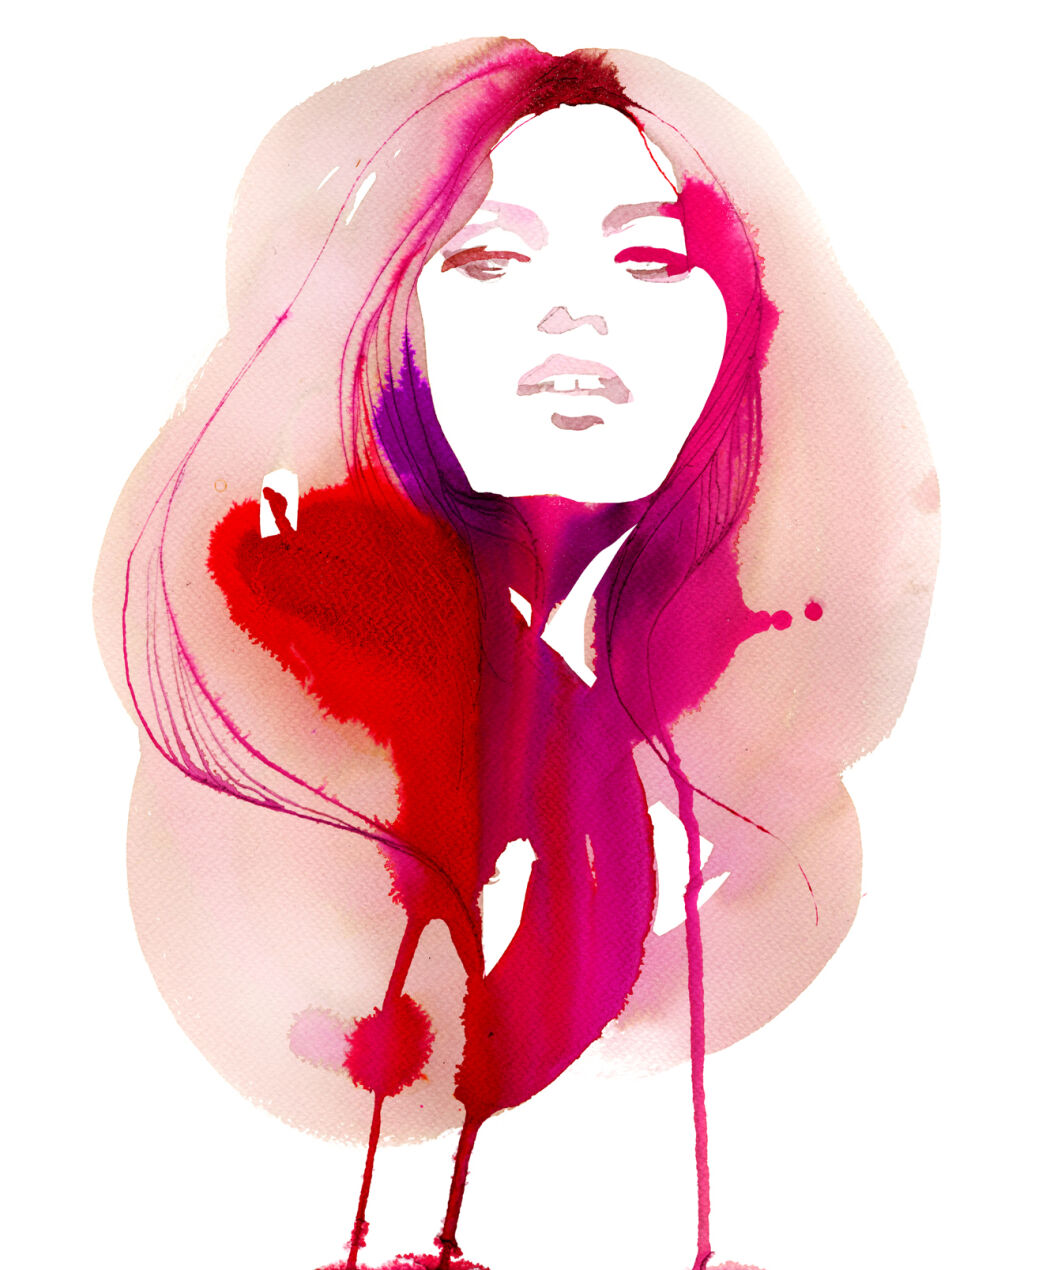 Dripping watercolor portrait by Stina Persson